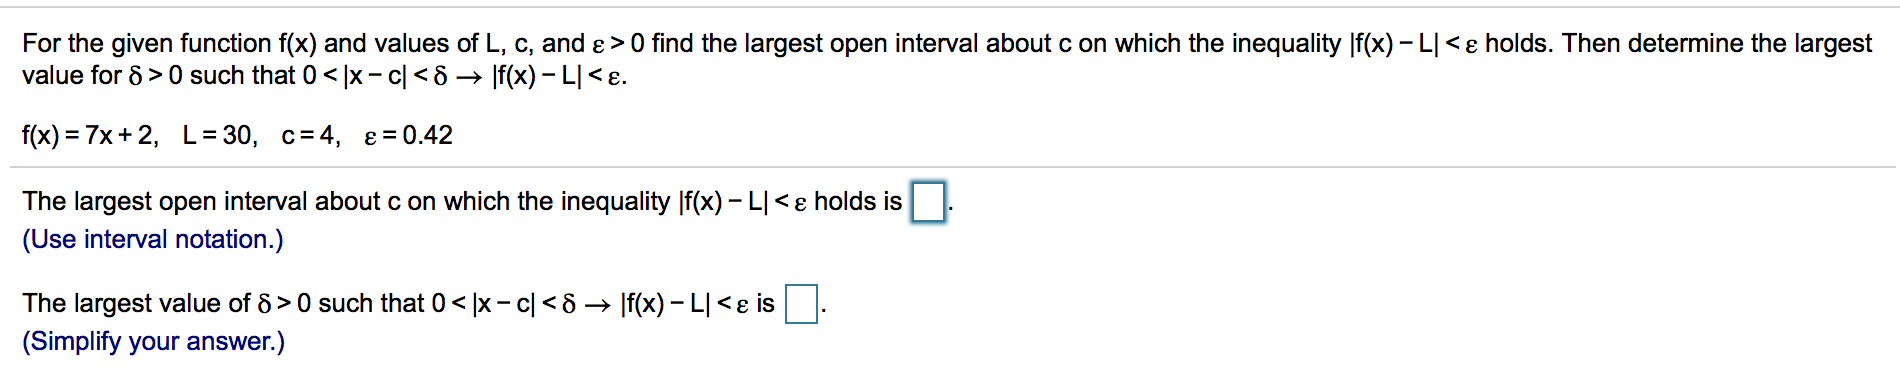 For the given function f(x) and values of L, c, and ɛ >0 find the largest open interval about c on which the inequality |f(x) – L| <ɛ holds. Then determine the largest
value for 8 > 0 such that 0< |x- c| < 8 → |f(x) –- L|< e.
f(x) = 7x+ 2,
L= 30, c=4,
e= 0.42
The largest open interval about c on which the inequality |f(x) – L|<ɛ holds is
(Use interval notation.)
The largest value of 8 > 0 such that 0 < |x - c| < 8 → |f(x) – L| <ɛ is
(Simplify your answer.)
